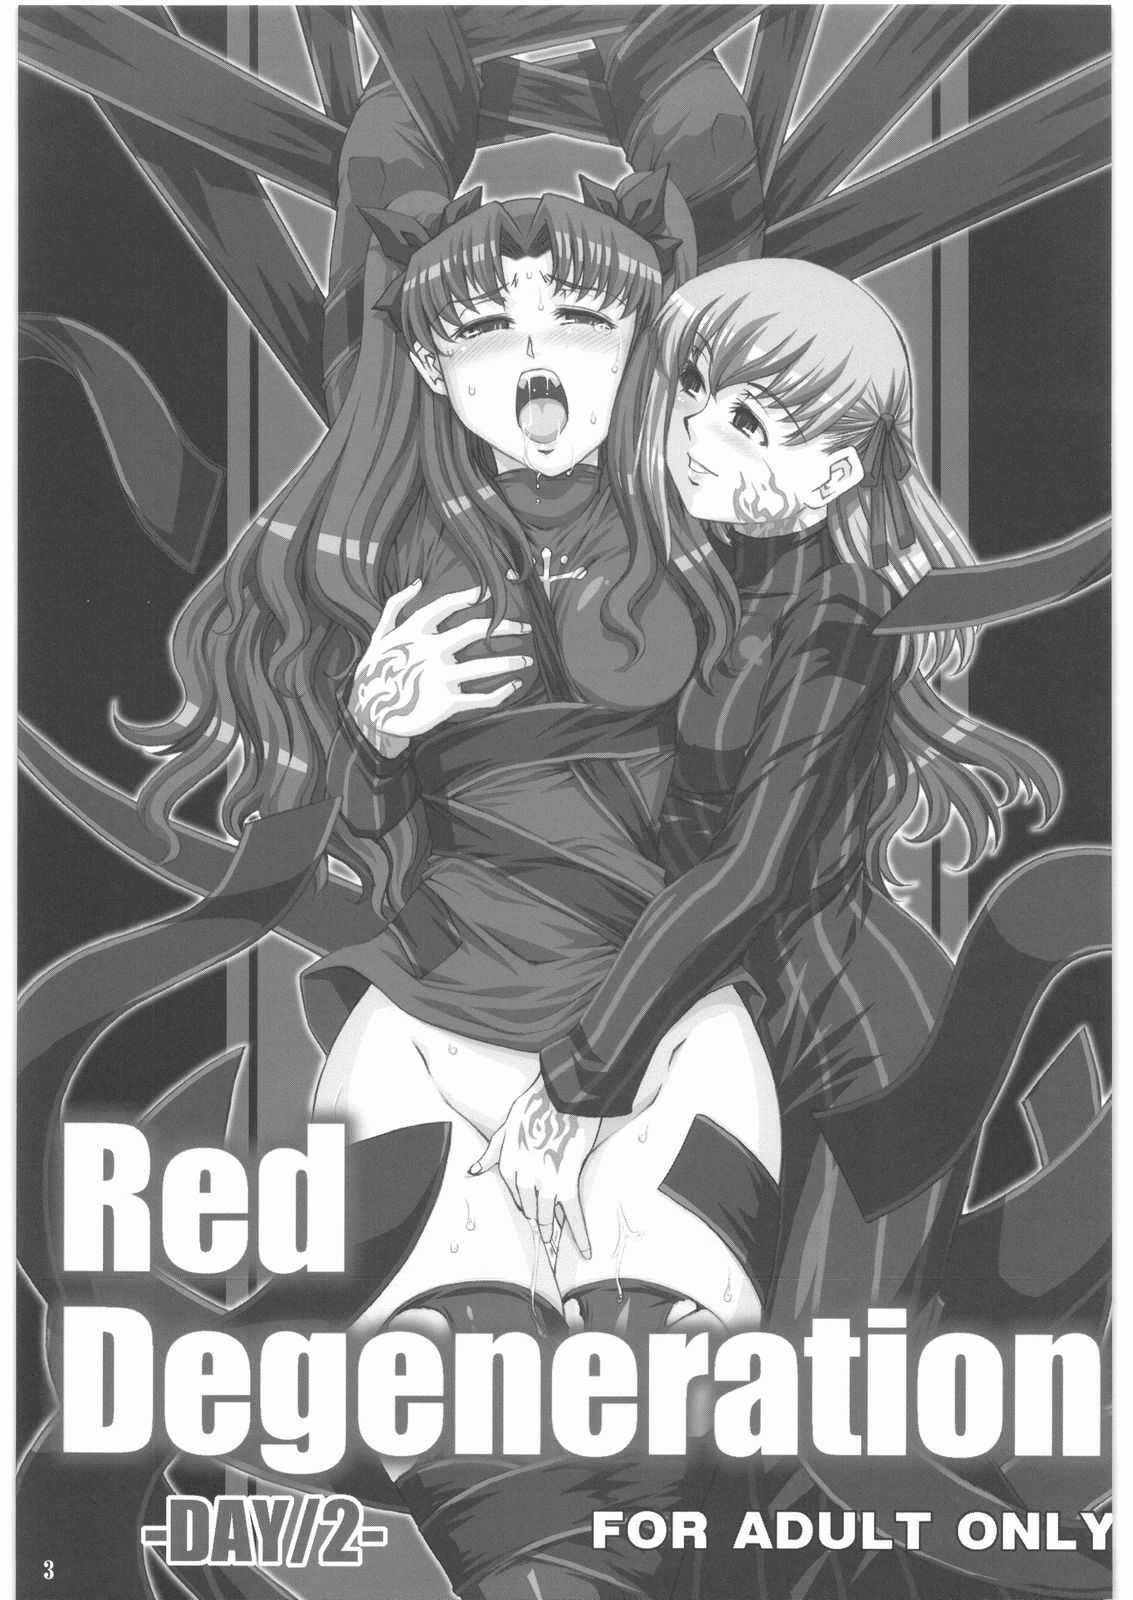 [H.B(B-RIVER)] Red Degeneration DAY2 (Fate stay night) 